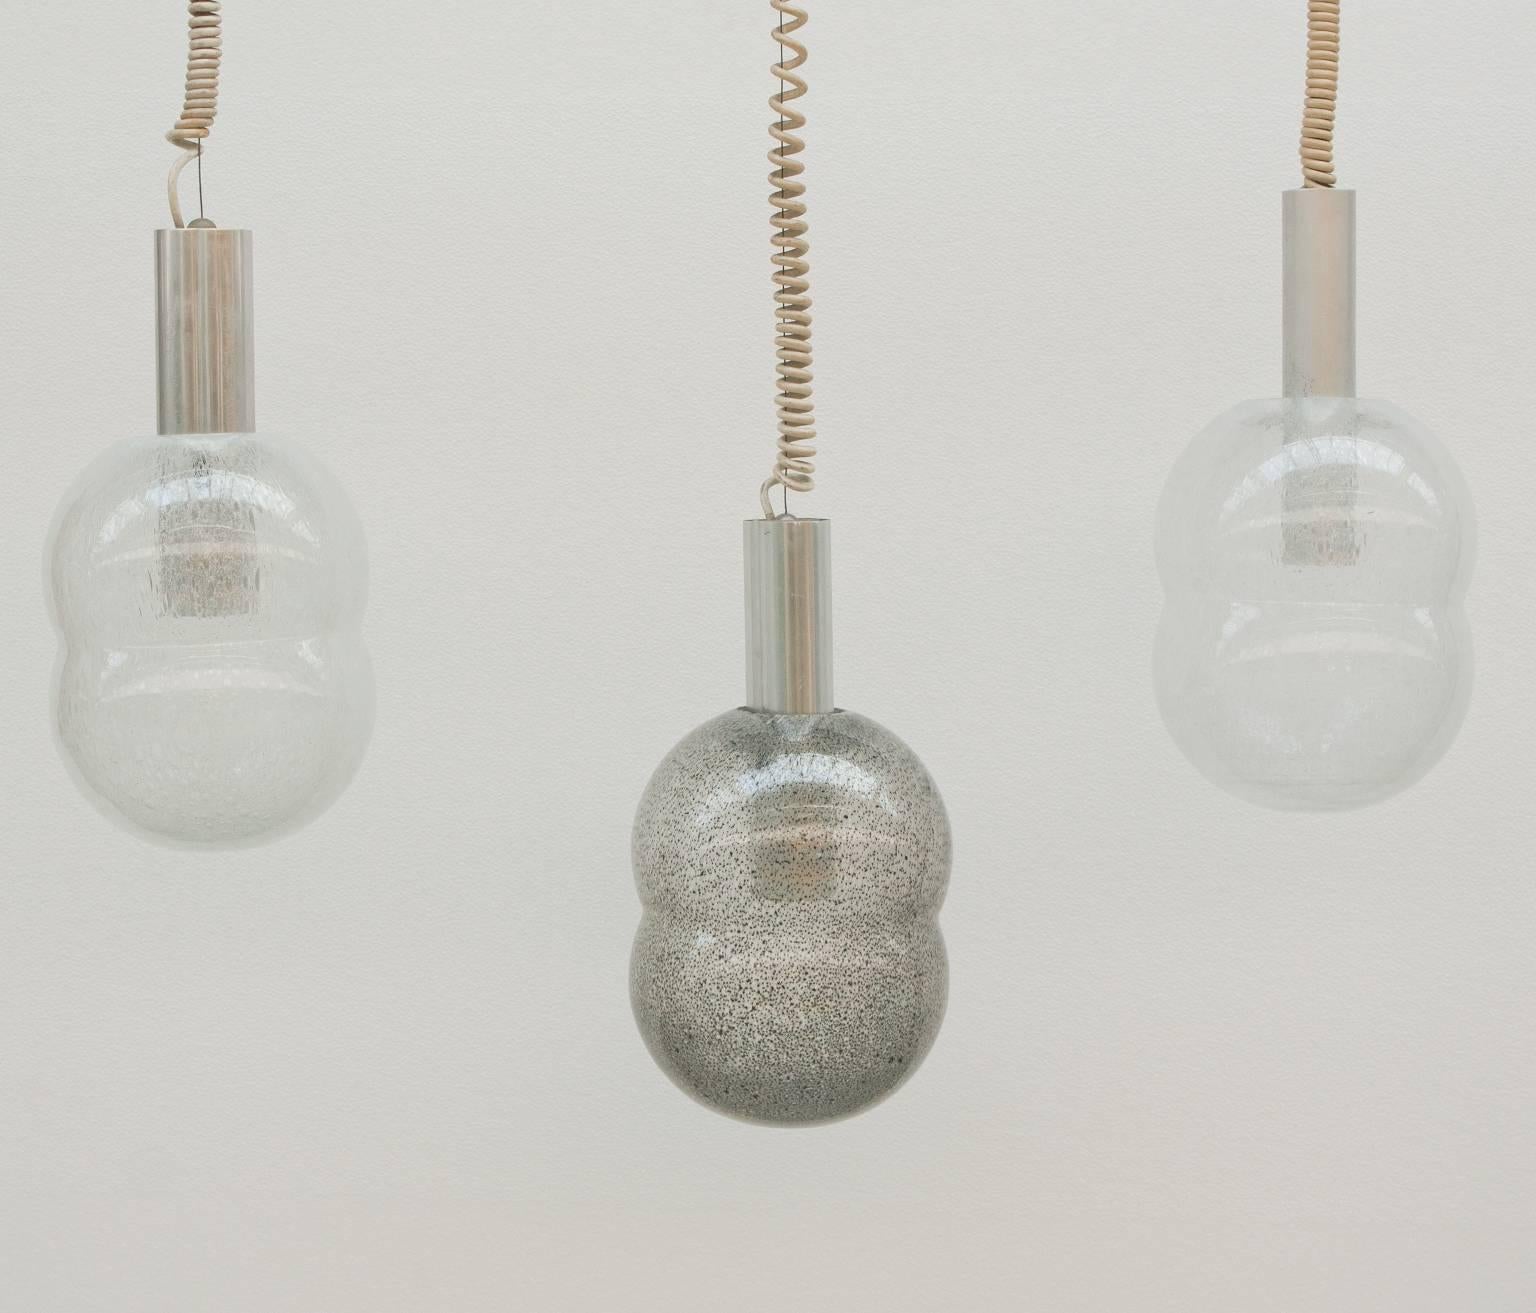 Tobia scarpa, flos, three bilobo hanging lamps. Blown glass (grey and white) and aluminium structure, 1965.